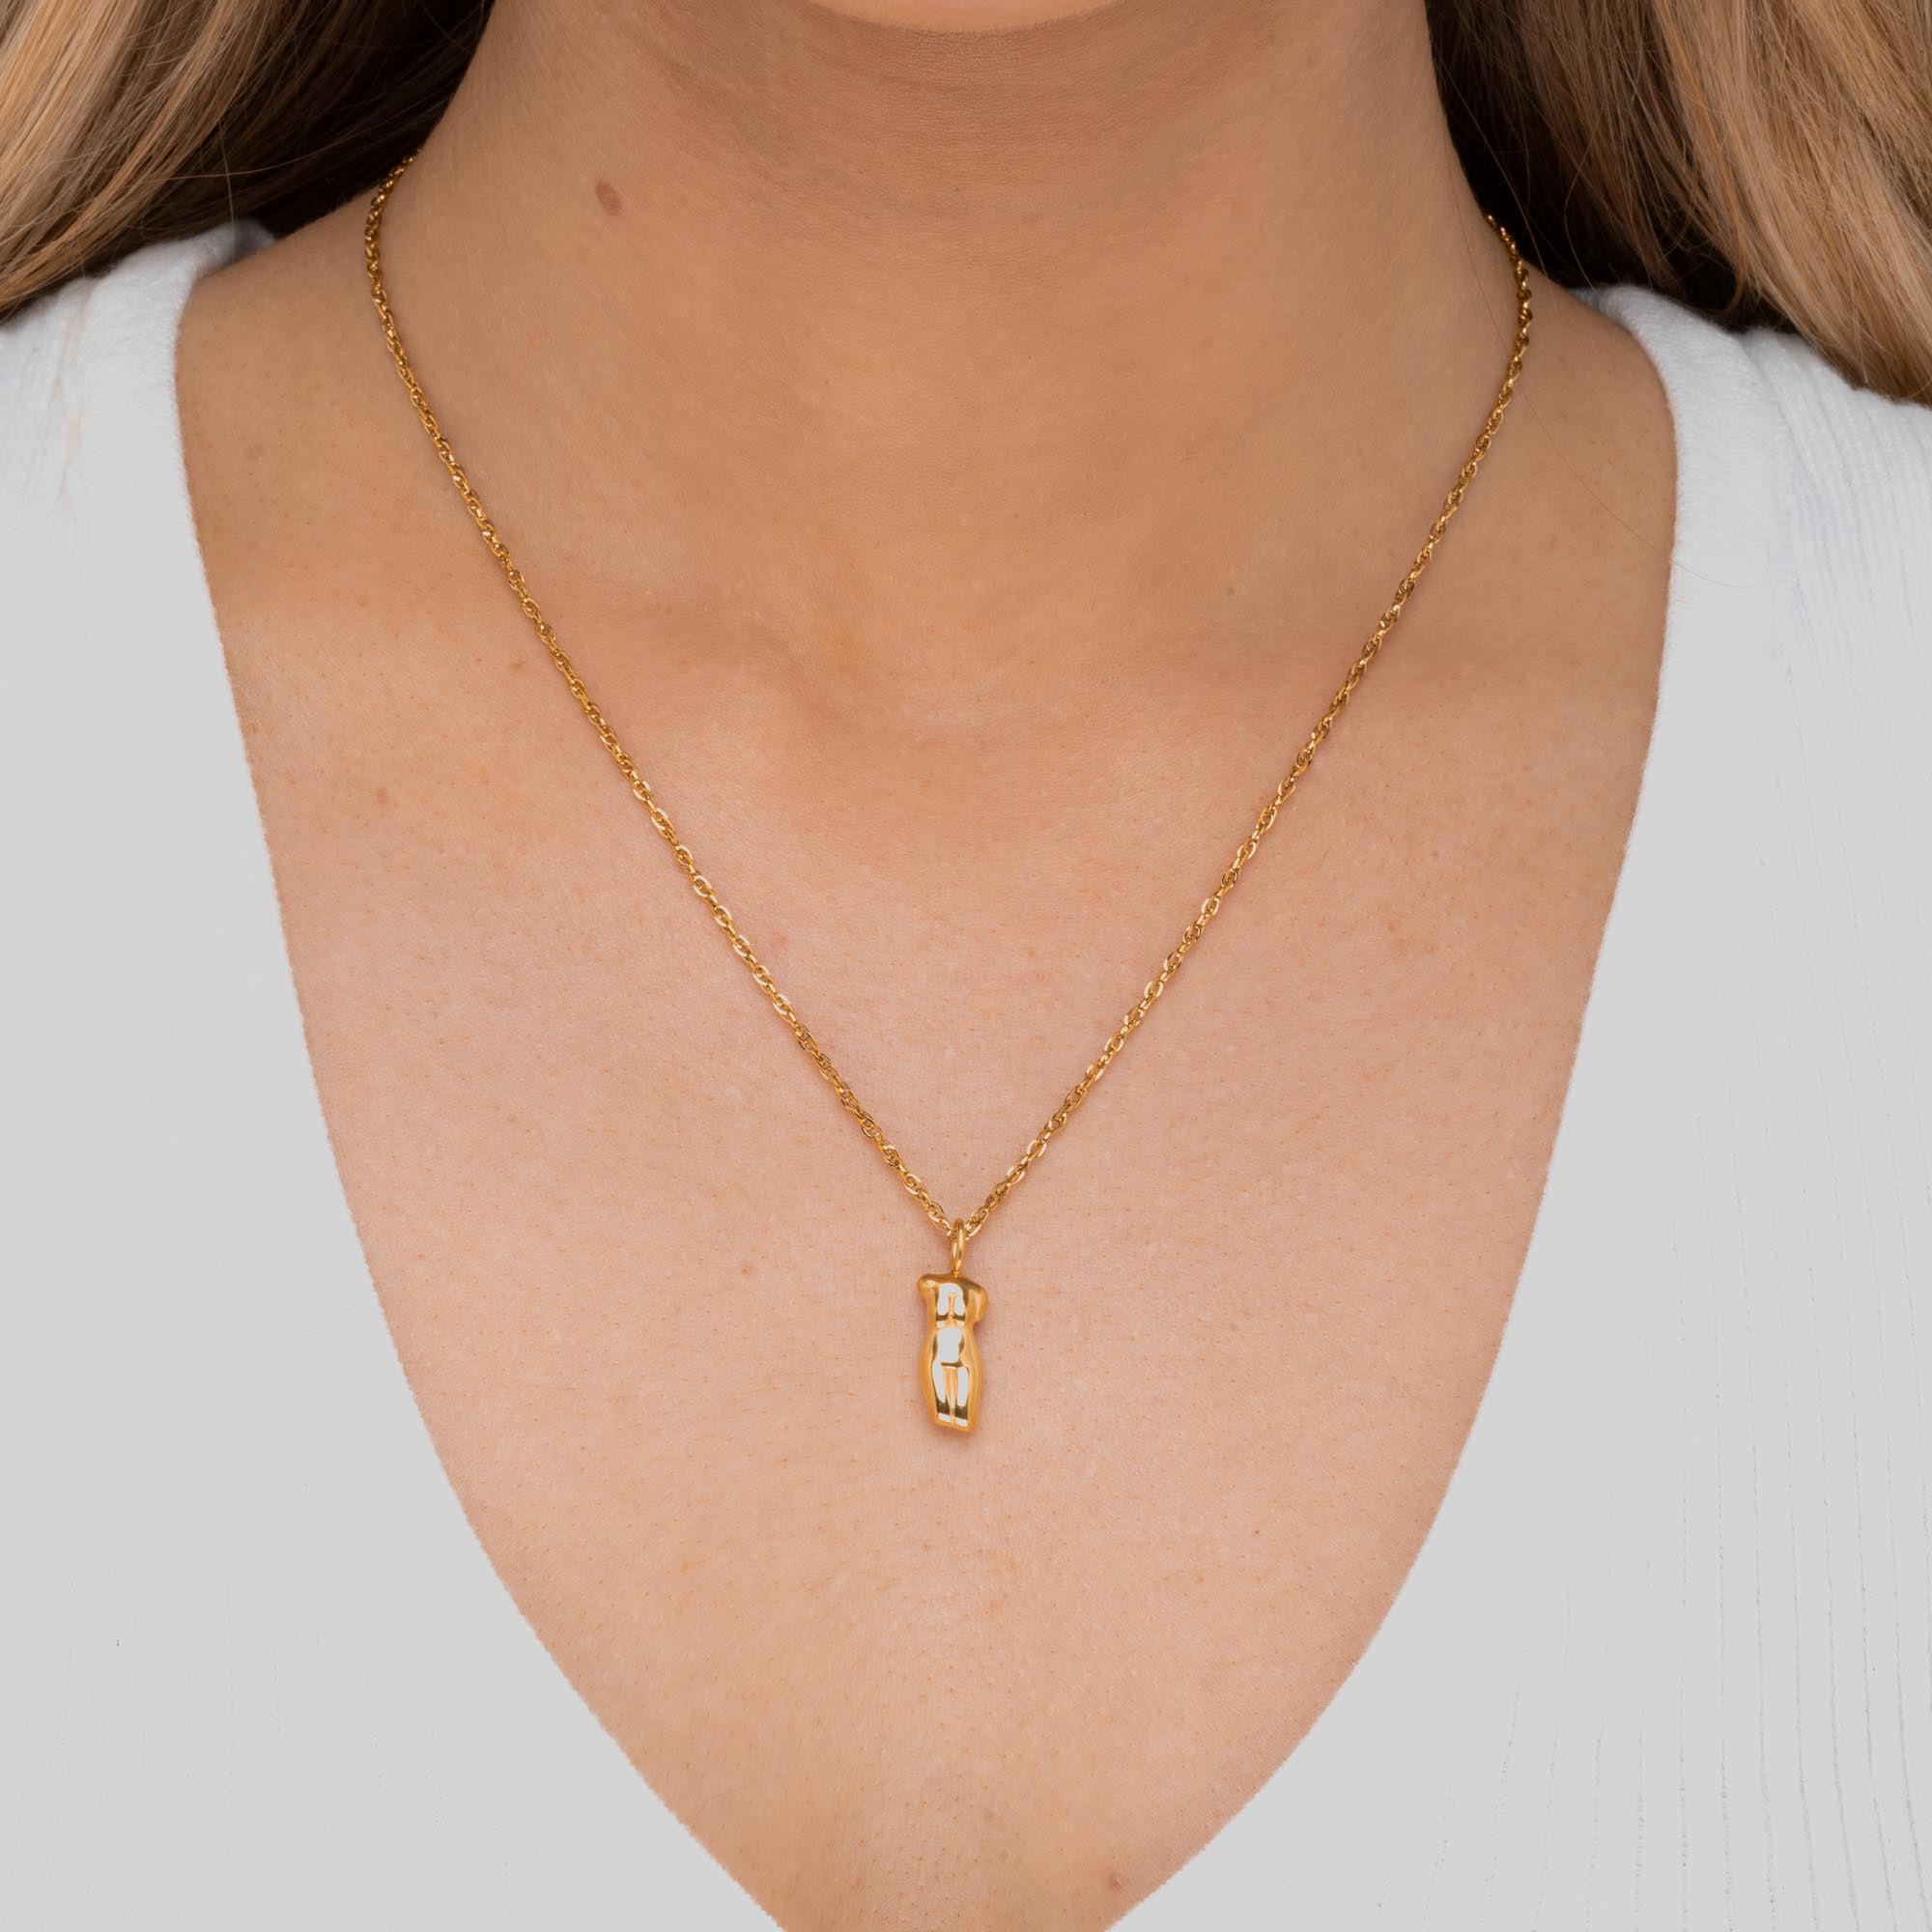 Body Positive Chain Necklace